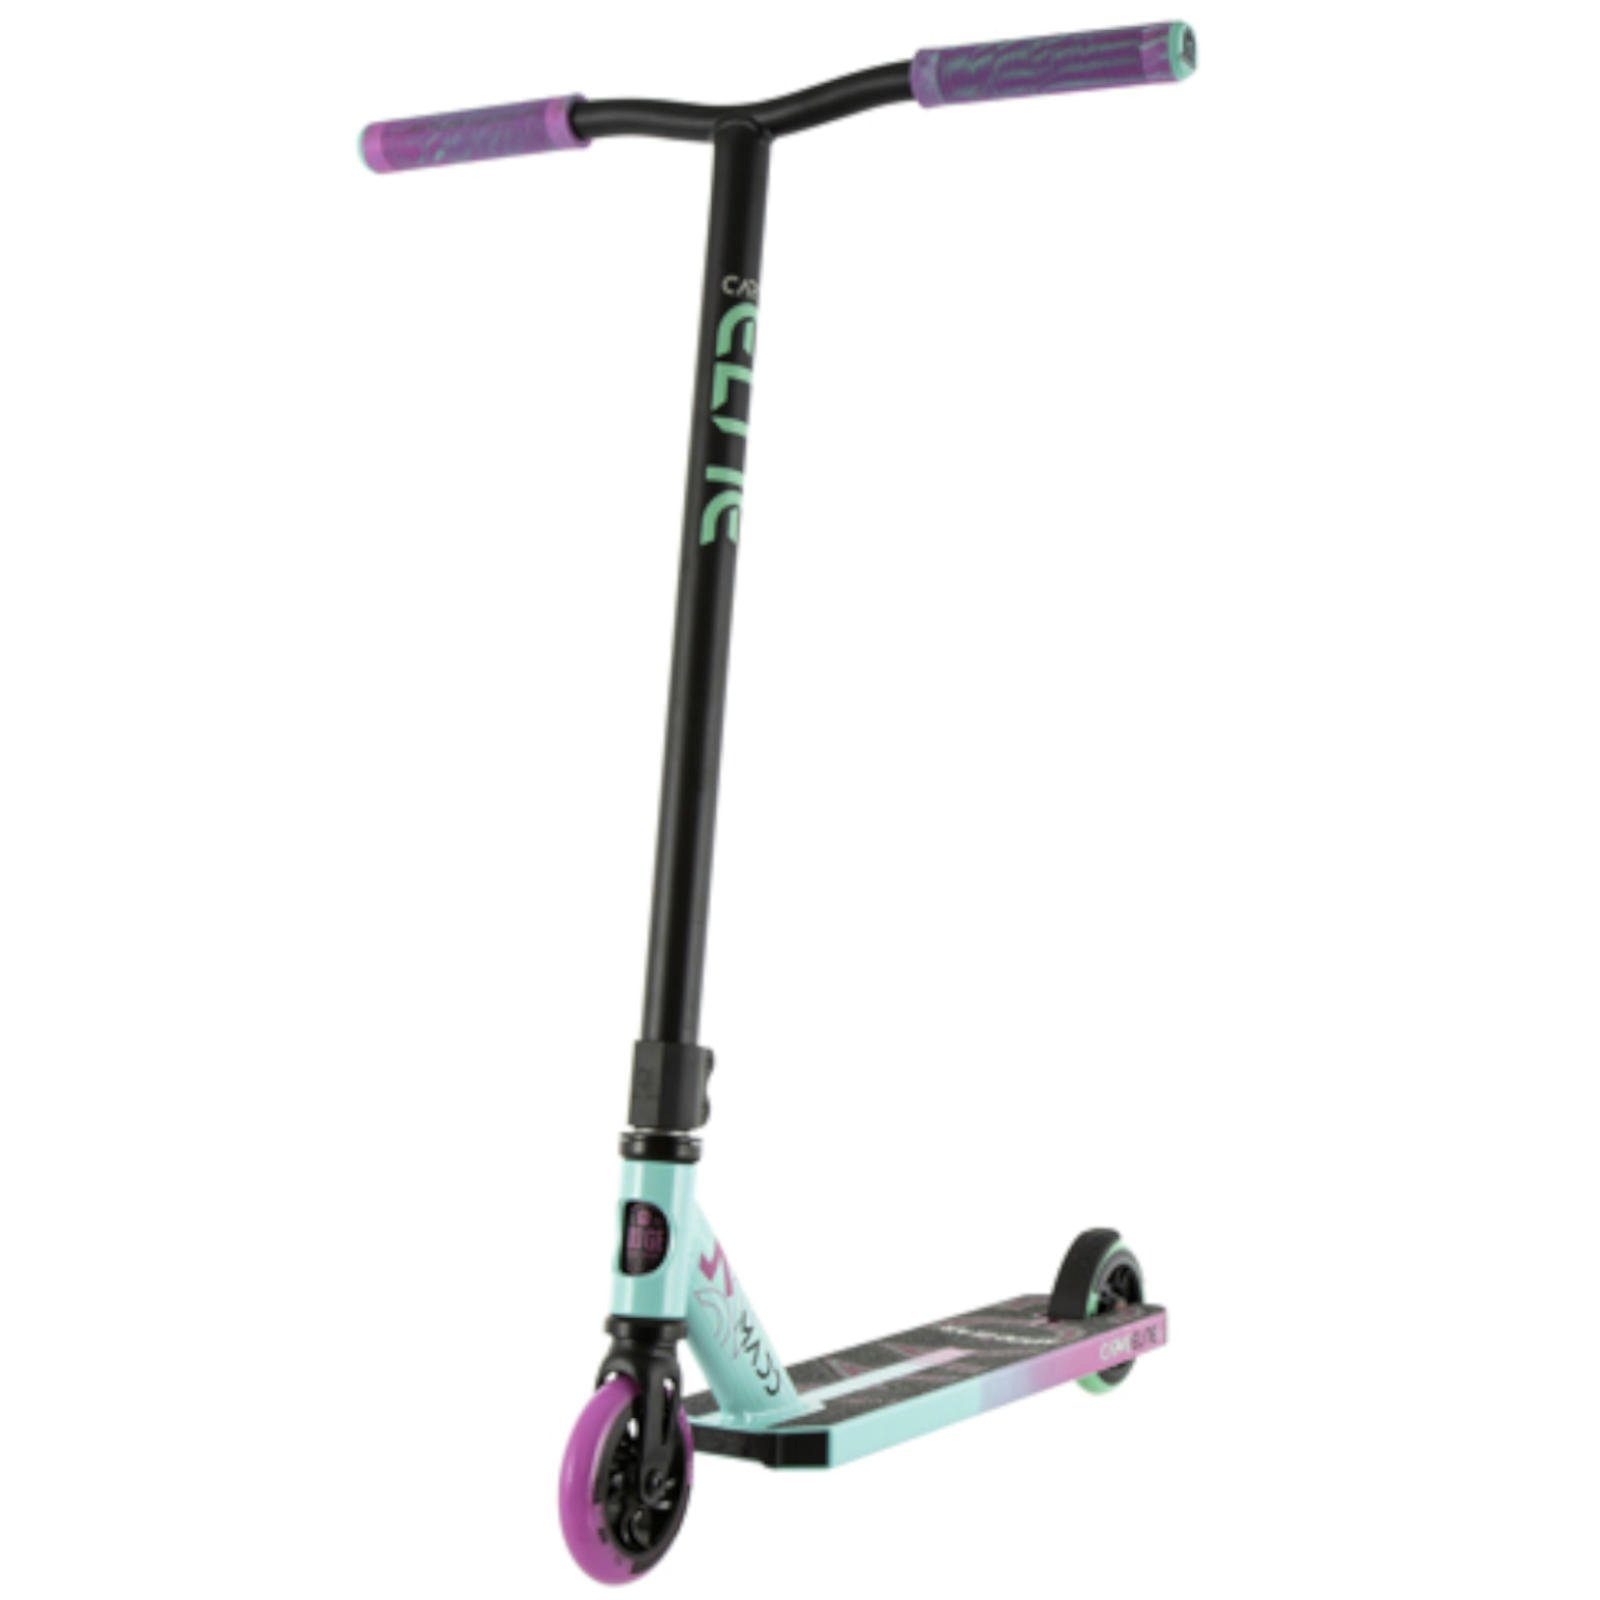 Madd Scooter Pink Teal | Cityroller